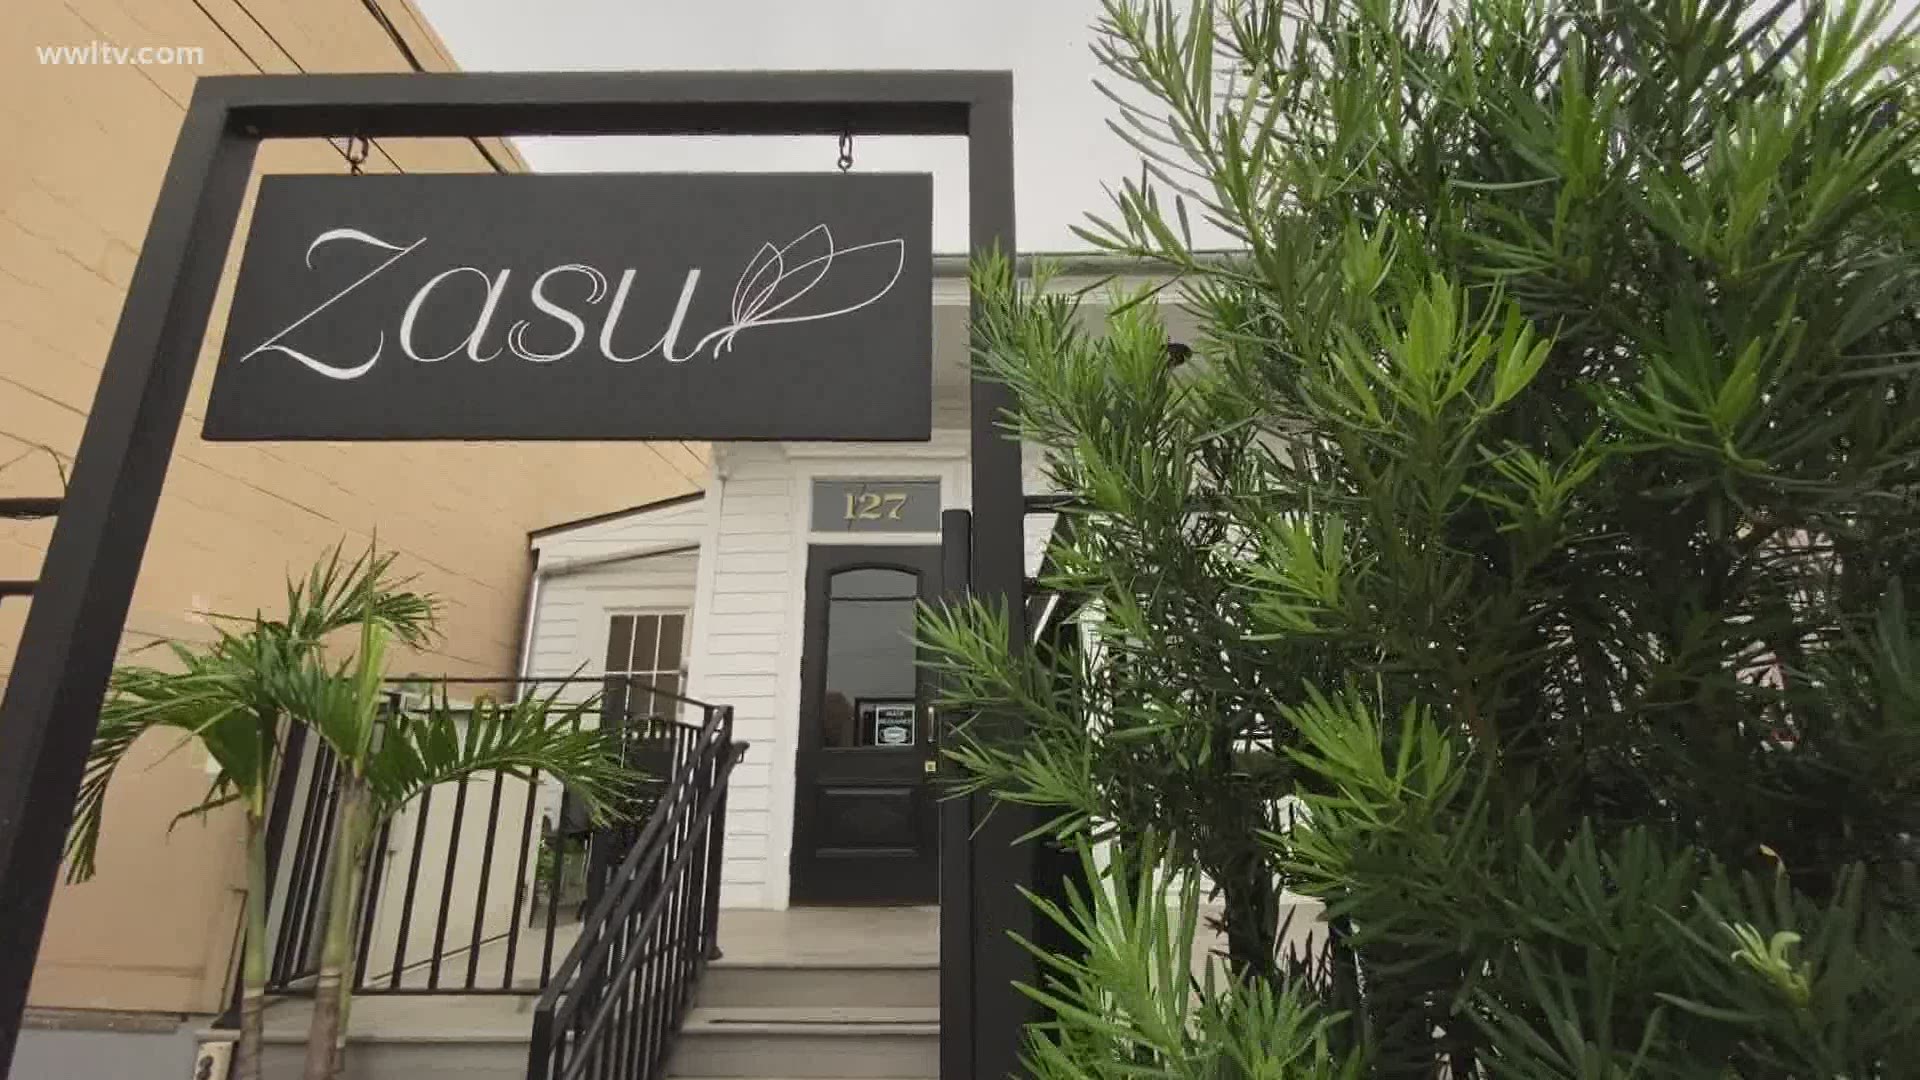 Eric Paulsen visits Zasu, award-winning Chef Sue Zemanick's new Mid-City restaurant. She talks about how she and staff are adjusting to the challenges of COVID-19.